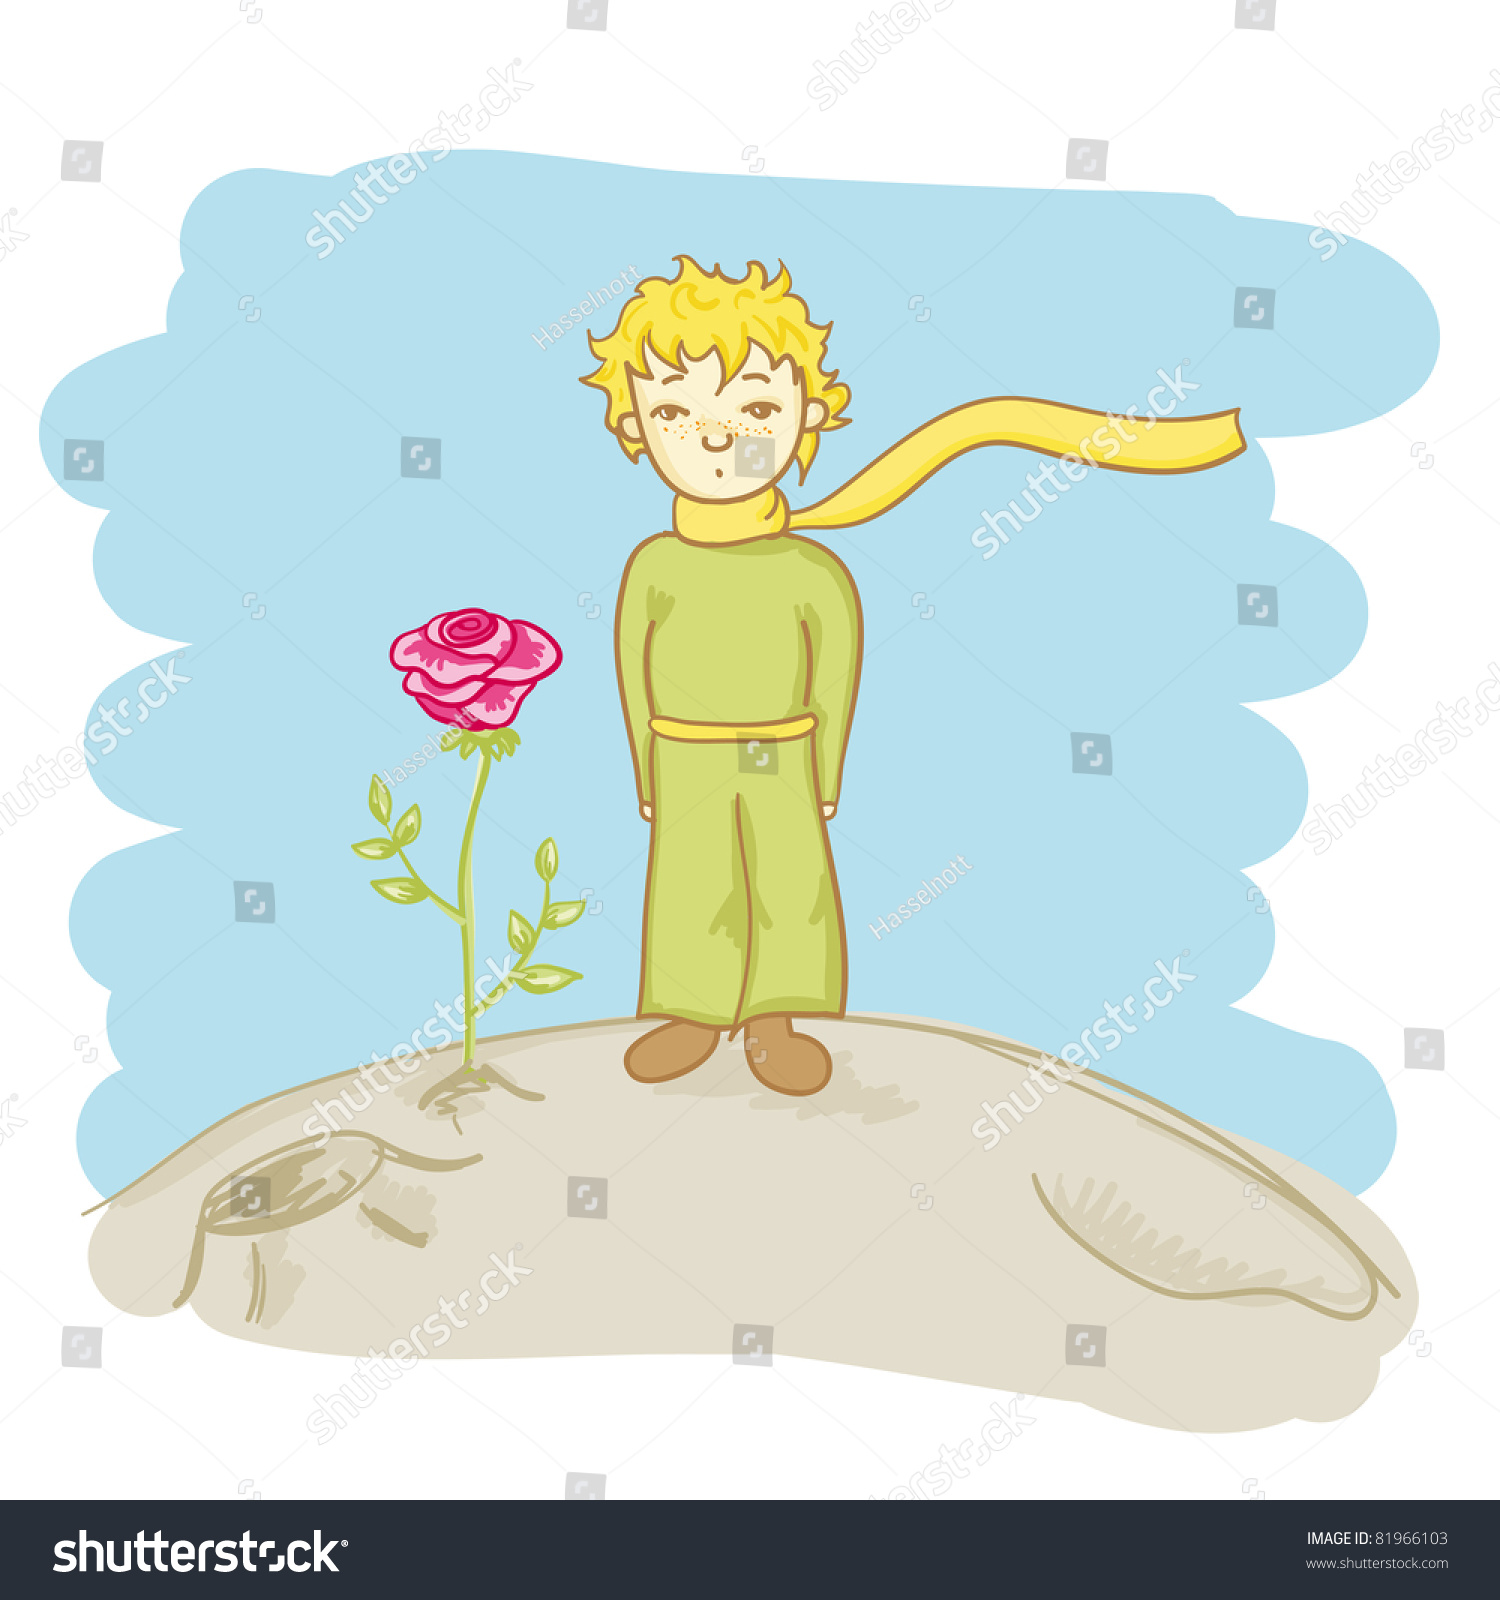 Little Prince And His Rose Vector Illustration - 81966103 : Shutterstock